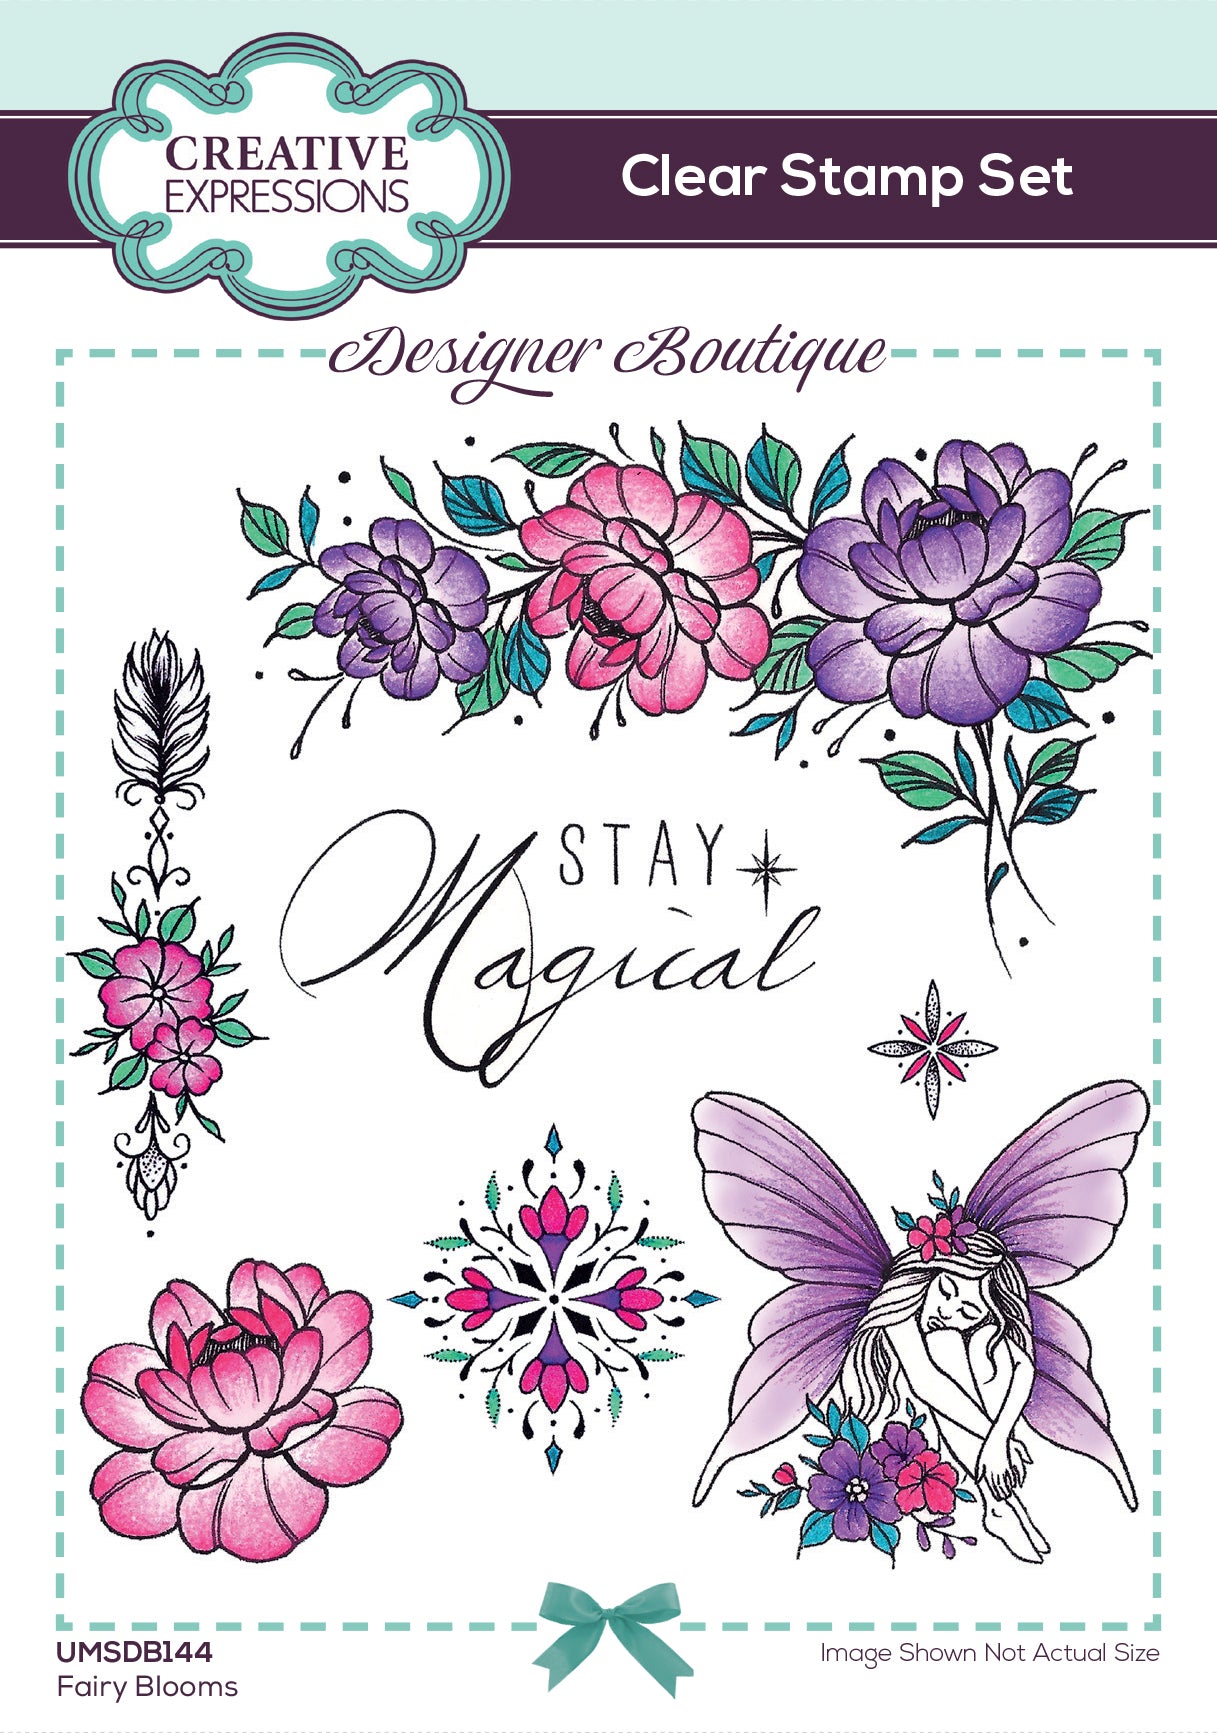 Creative Expressions Designer Boutique Fairy Blooms 6 in x 4 in Stamp Set